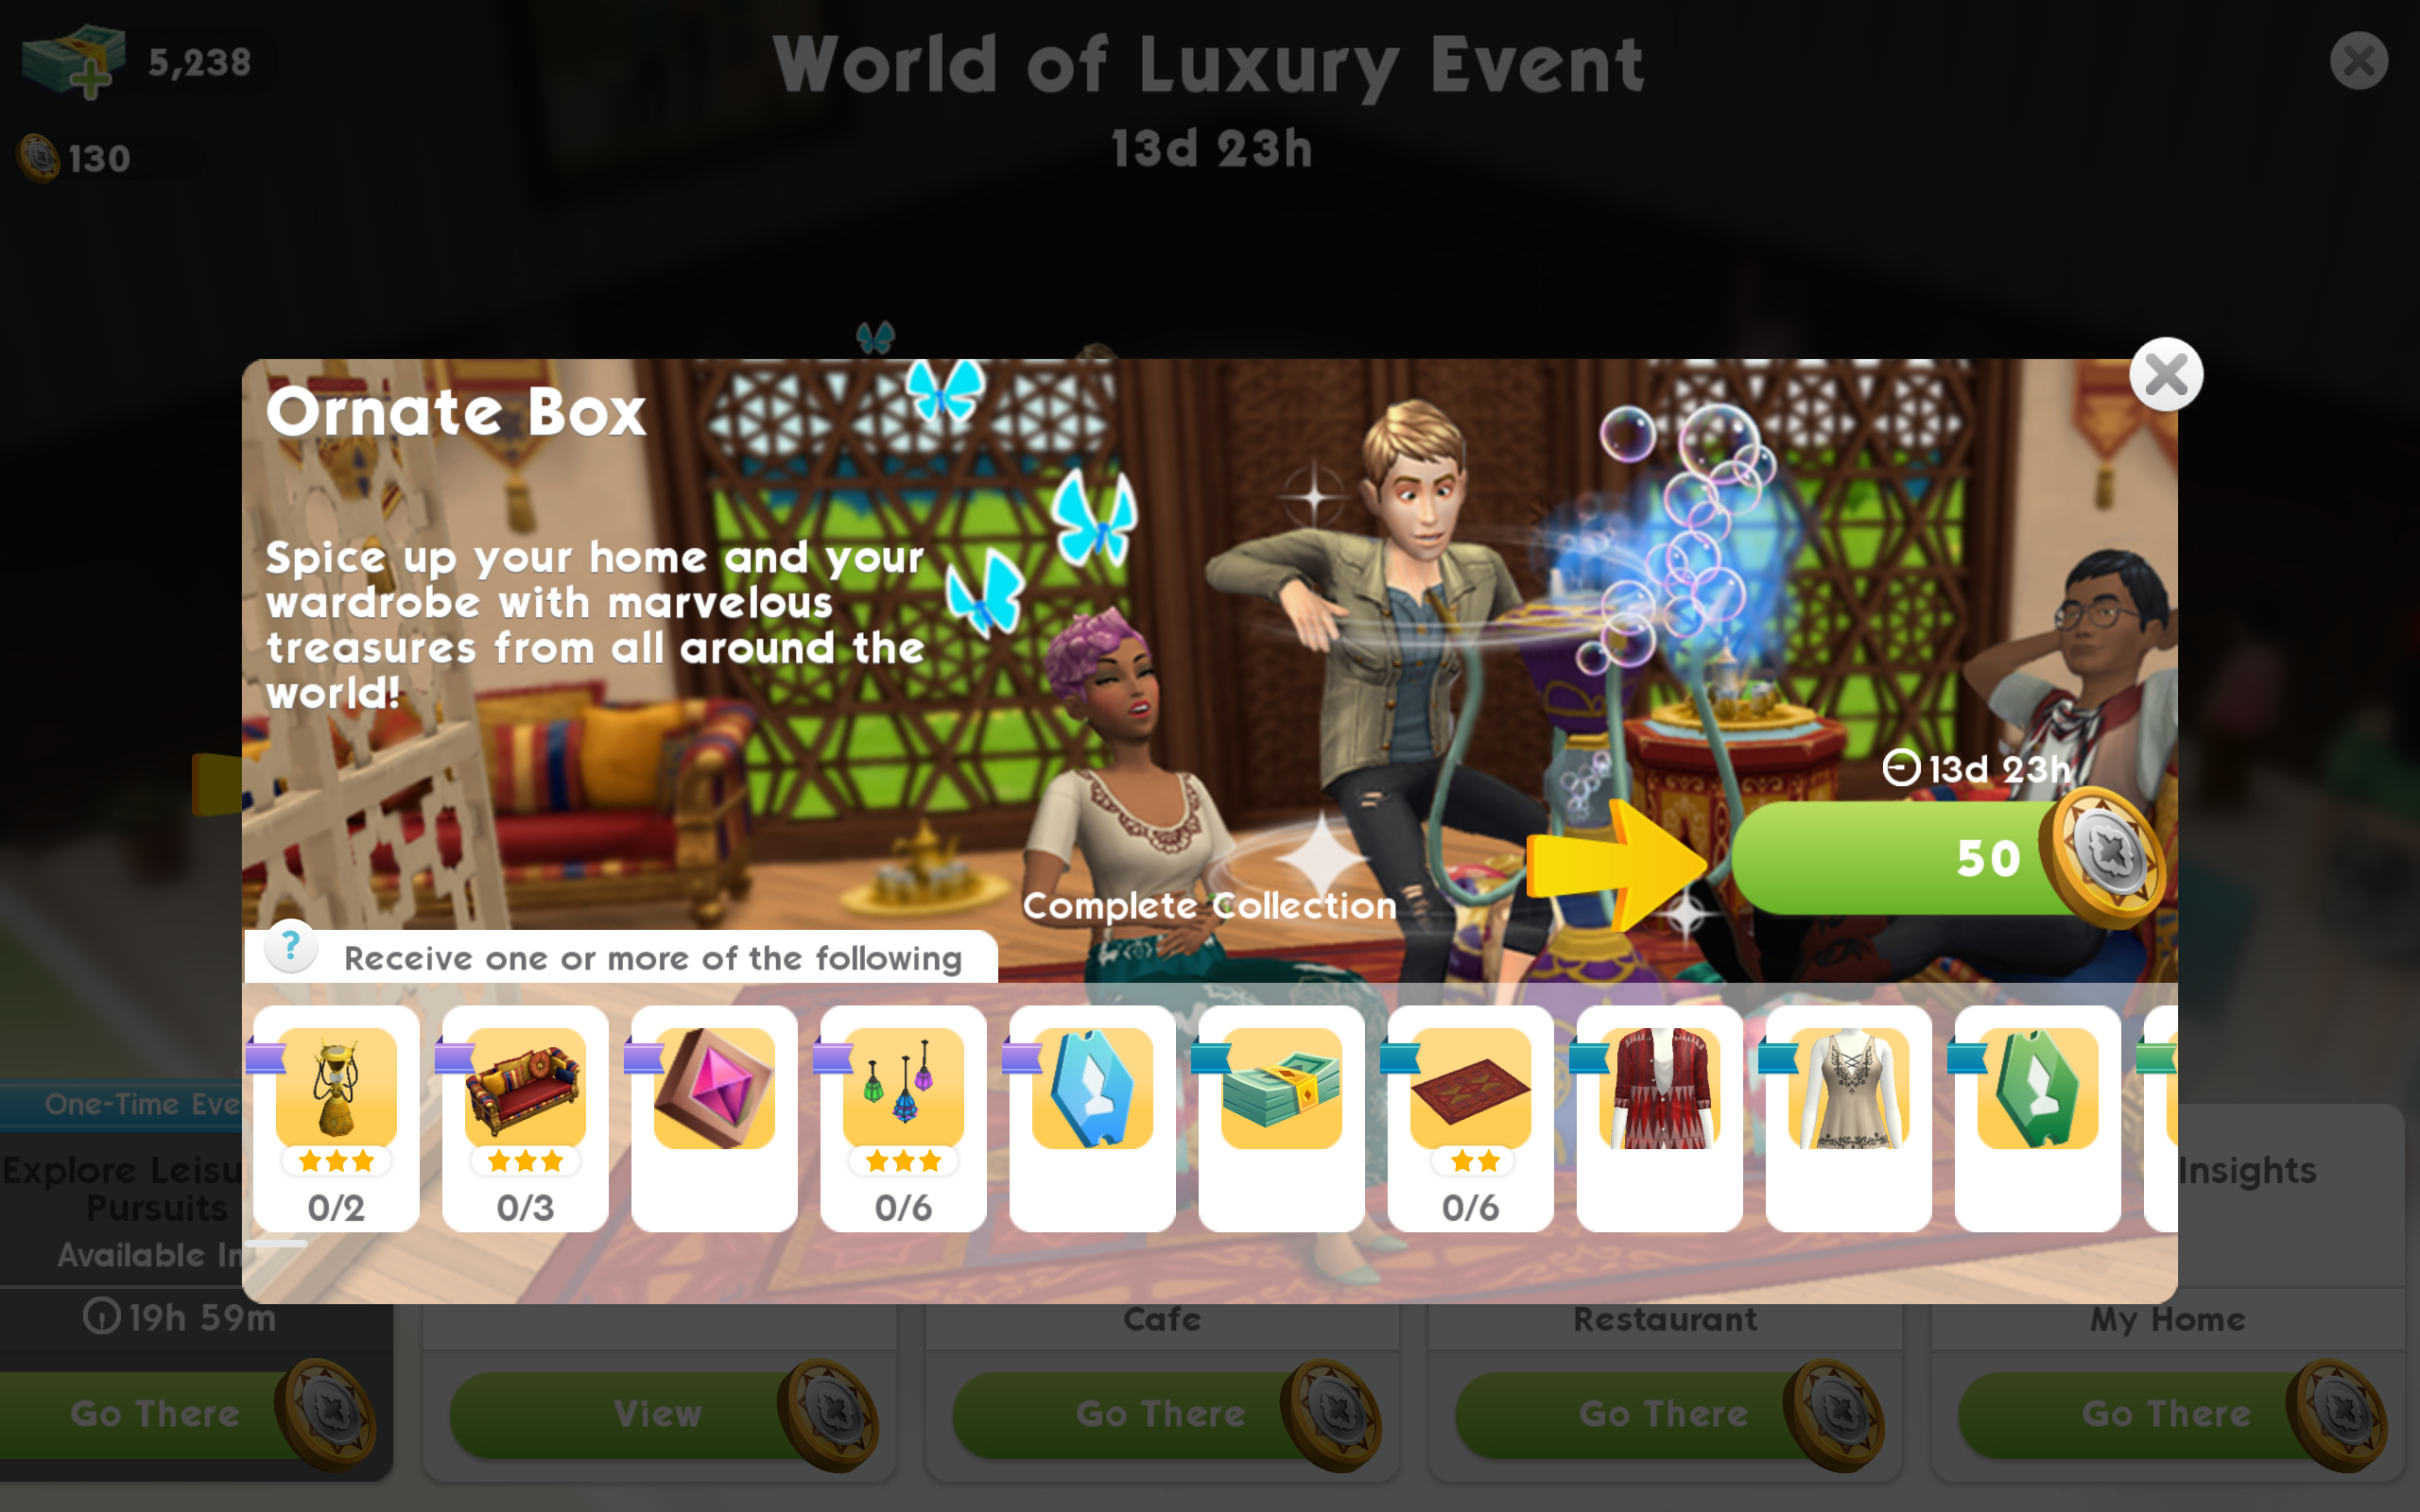 How To Complete the World of Luxury Event (Bubble Blower) in The